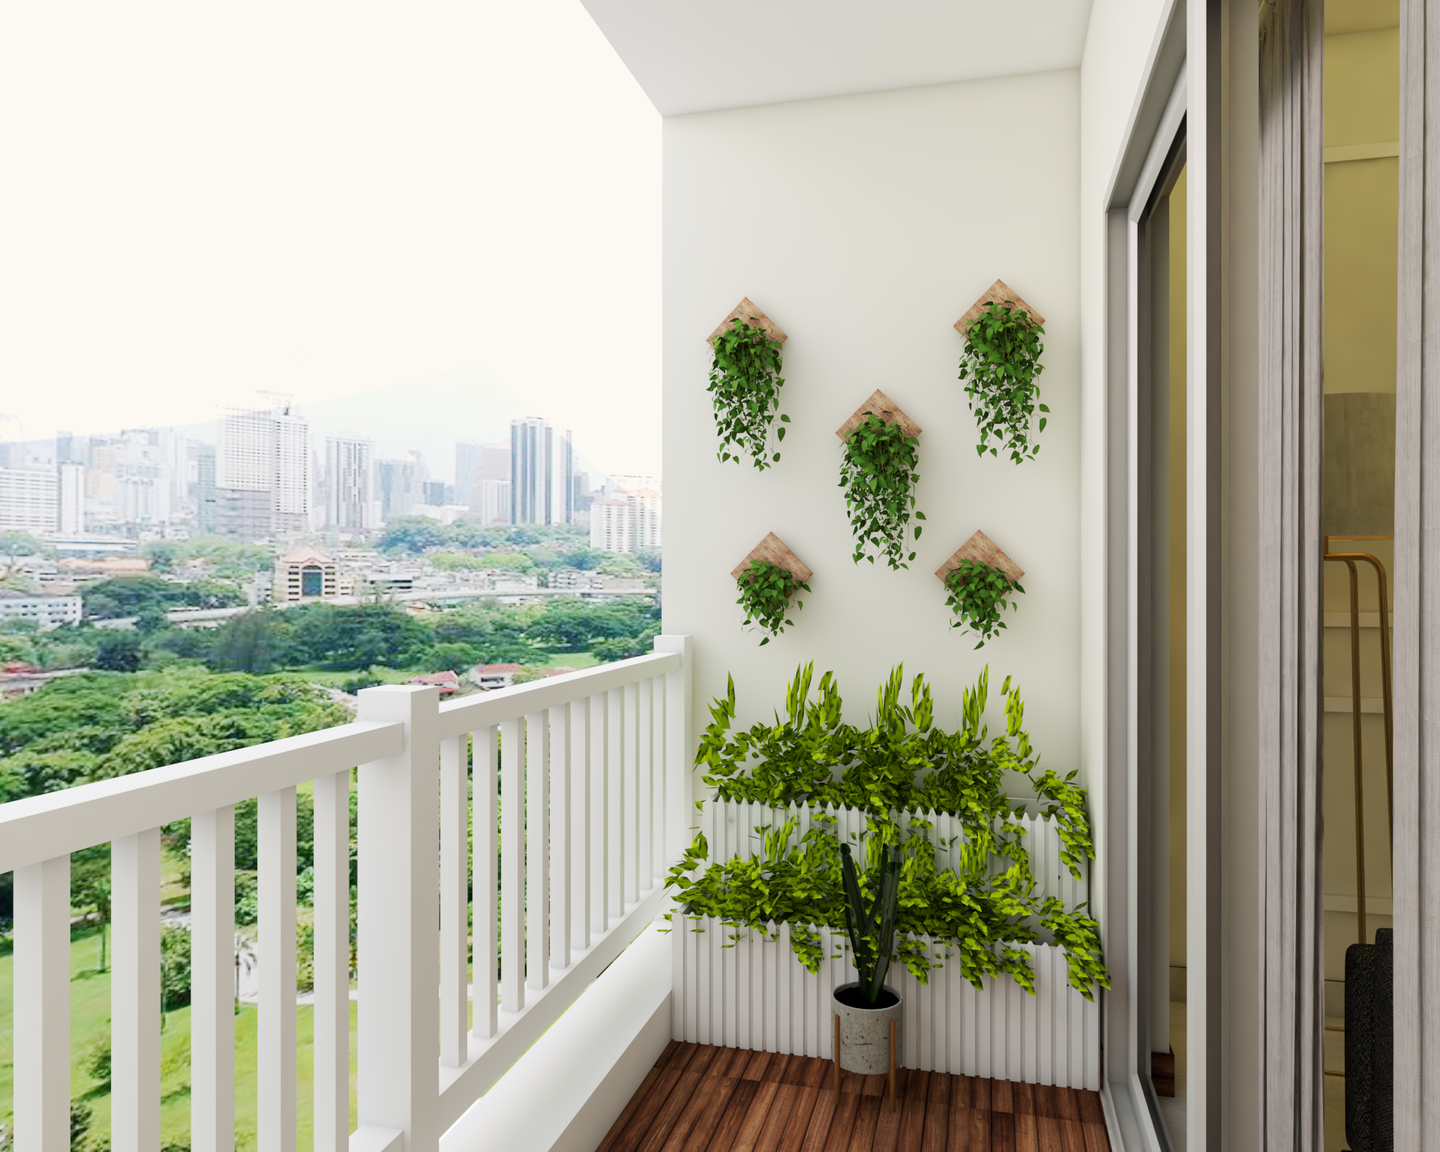 Modern Convenient Balcony With Wooden Flooring - Livspace